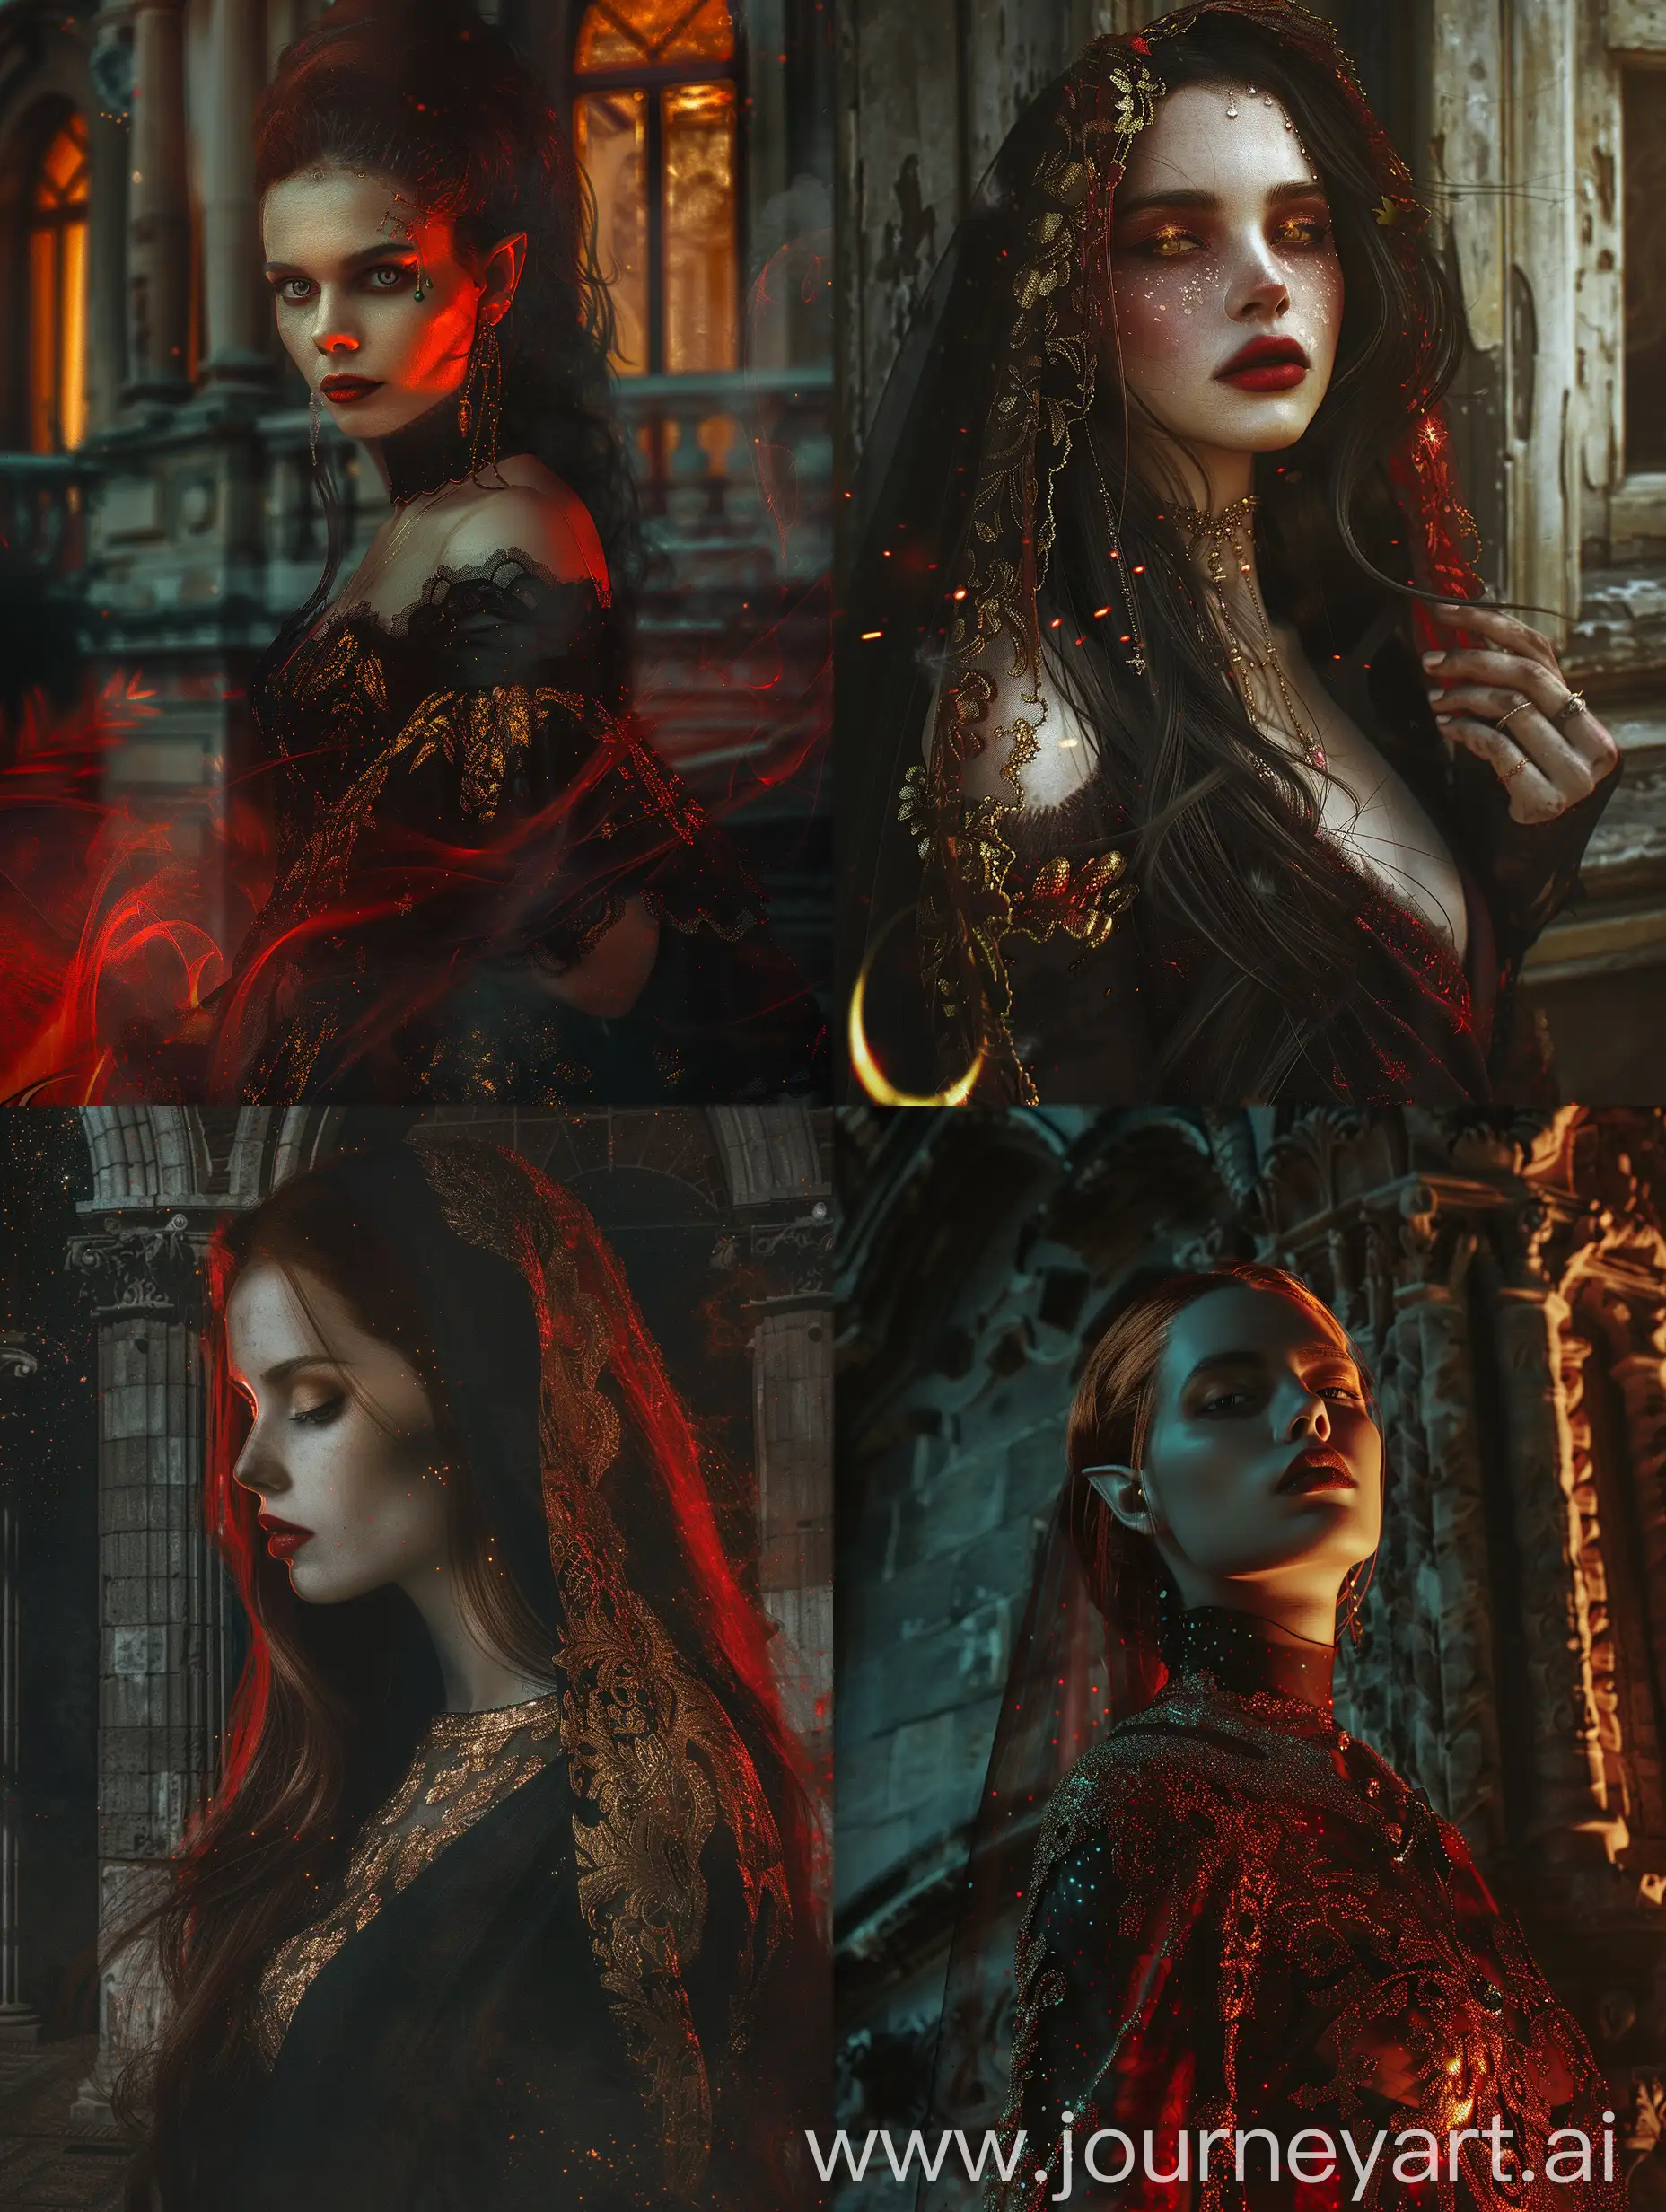 Vampire Queen, darkness, potrait, fantasy, horror, creepy, with subtle red and gold gradients, realistic, 1girl, beautiful, high detail, attractive, fit, pretty face, moonlight enveloping attire old building.